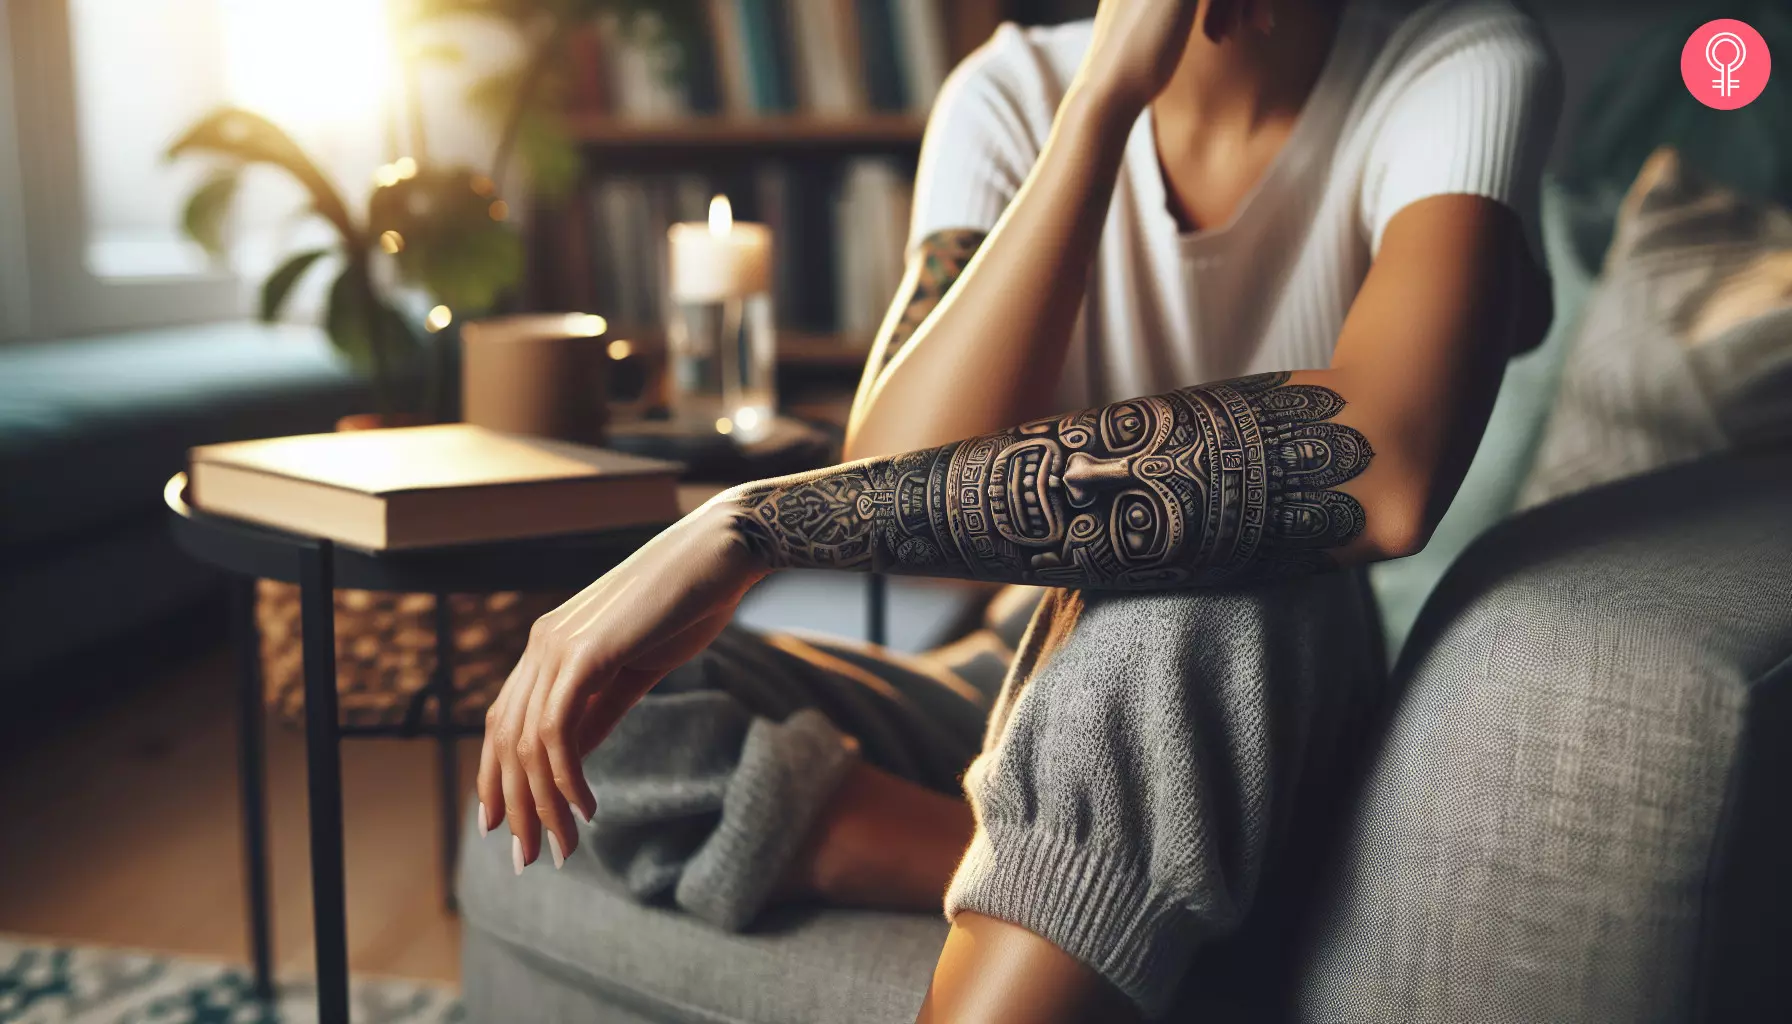 A Mayan mask tattoo on a woman’s forearm